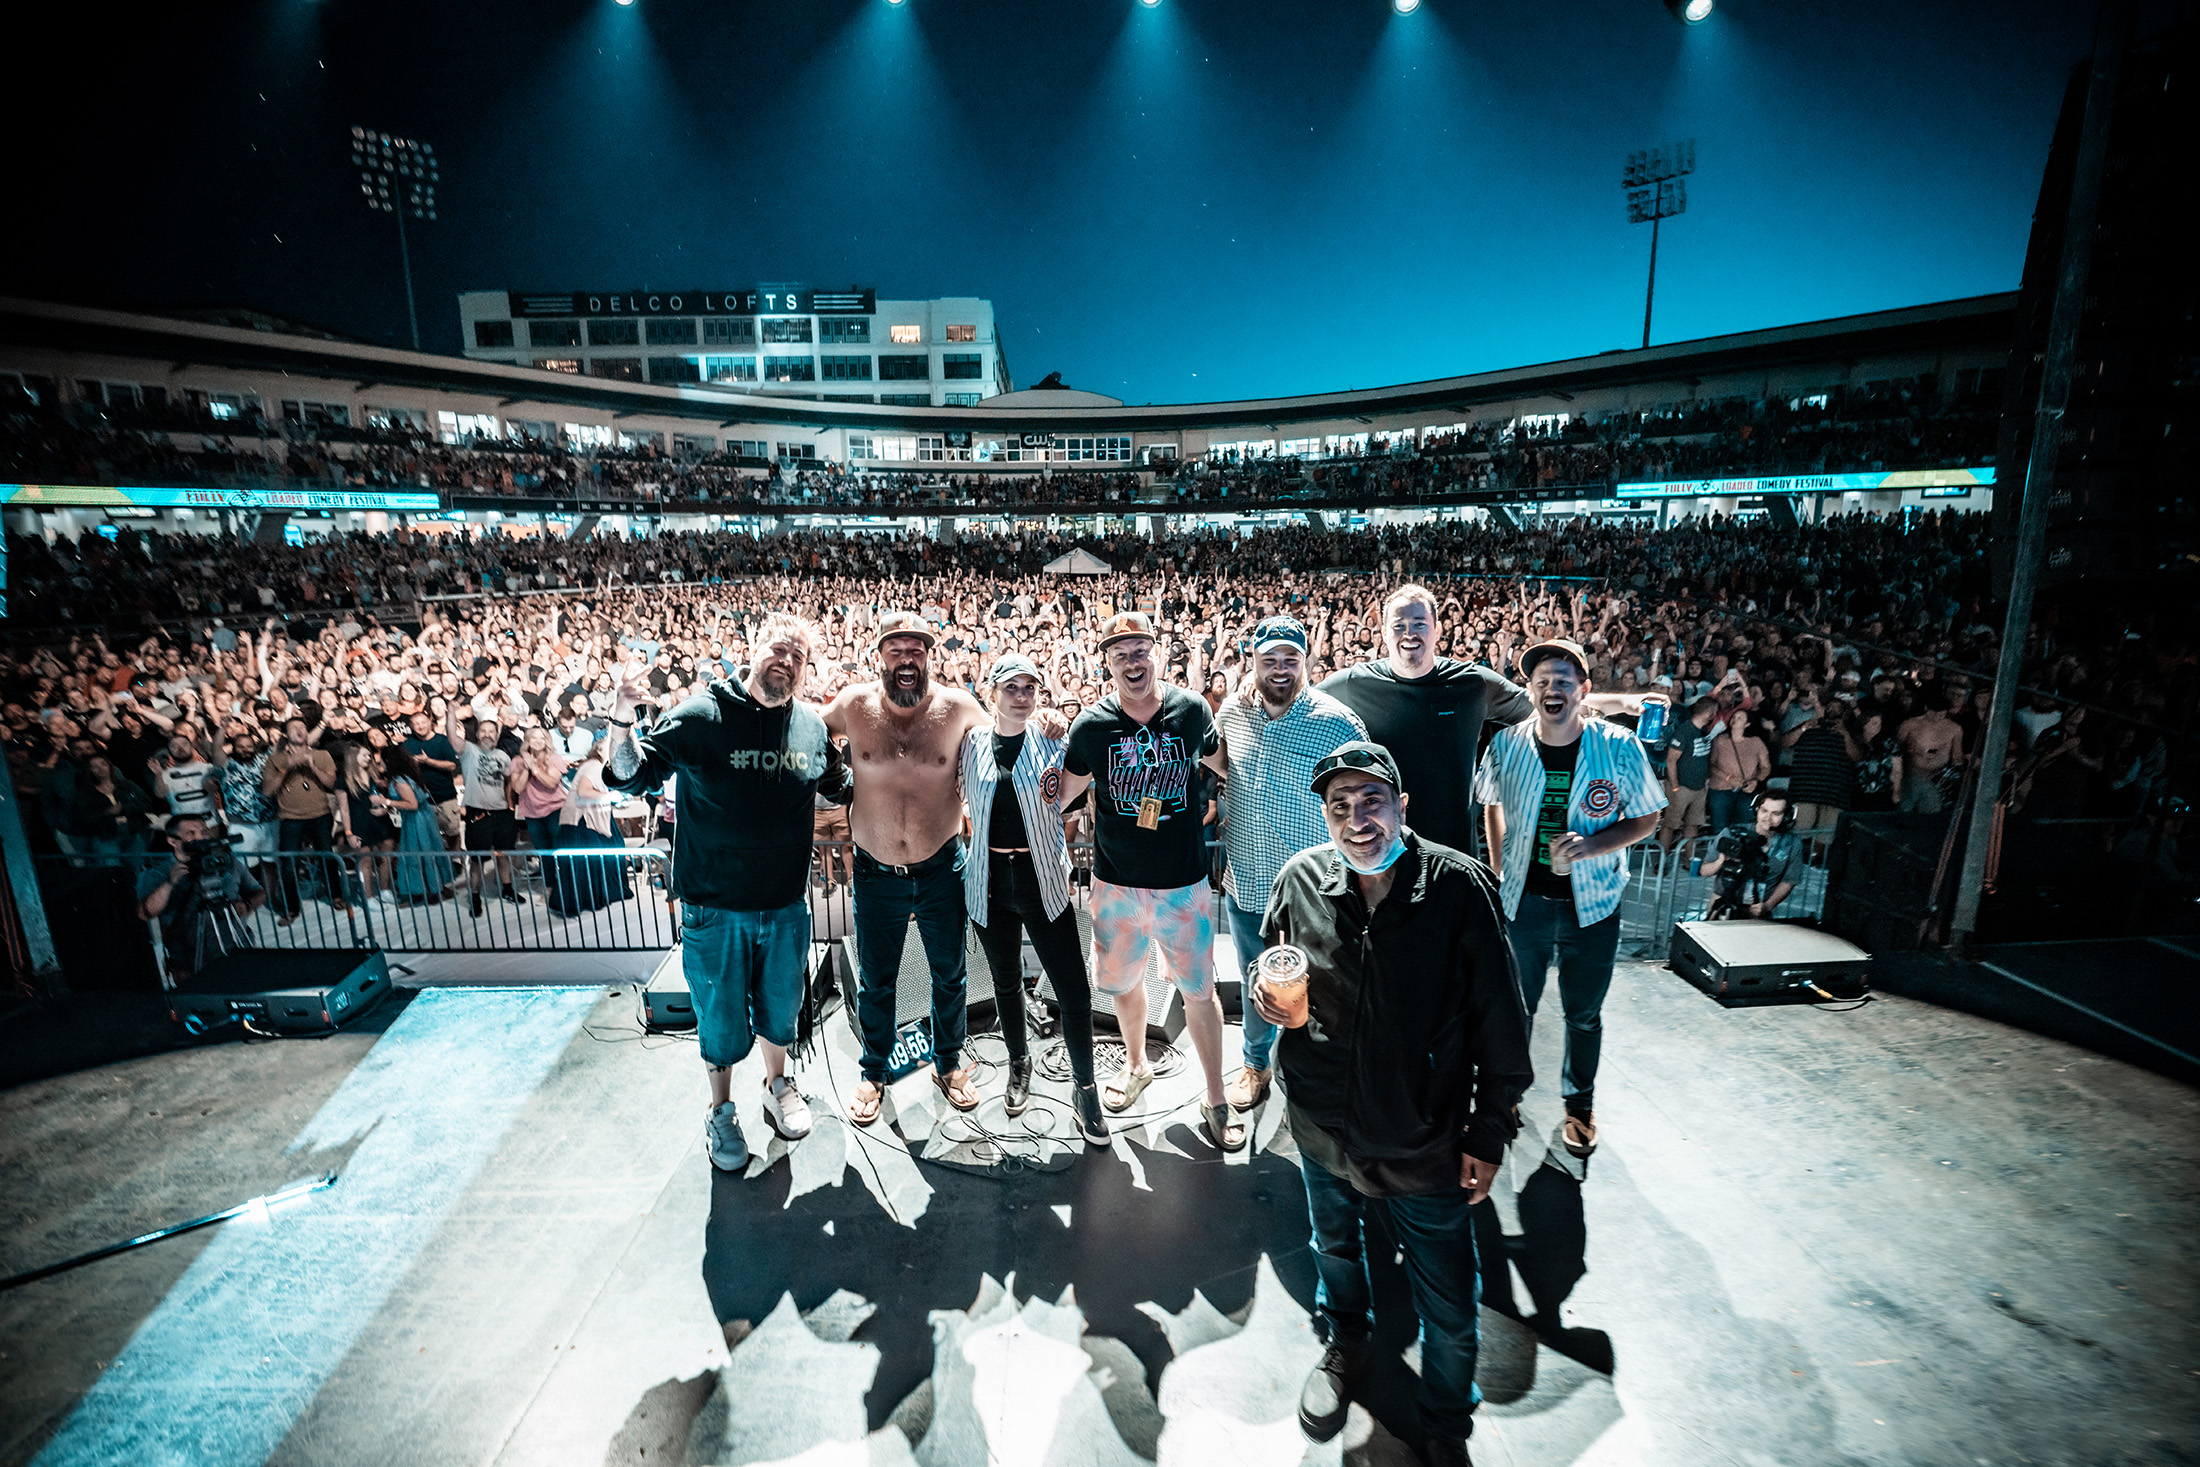 Big Jay Oakerson, Bert Kreischer, Taylor Tomlinson, Dave Williamson, Aaron Weber, Shane Gillis, Dustin Nickerson, and Dave Attell (front) at Day Air Ballpark in Dayton, OH on June 18, 2022. 